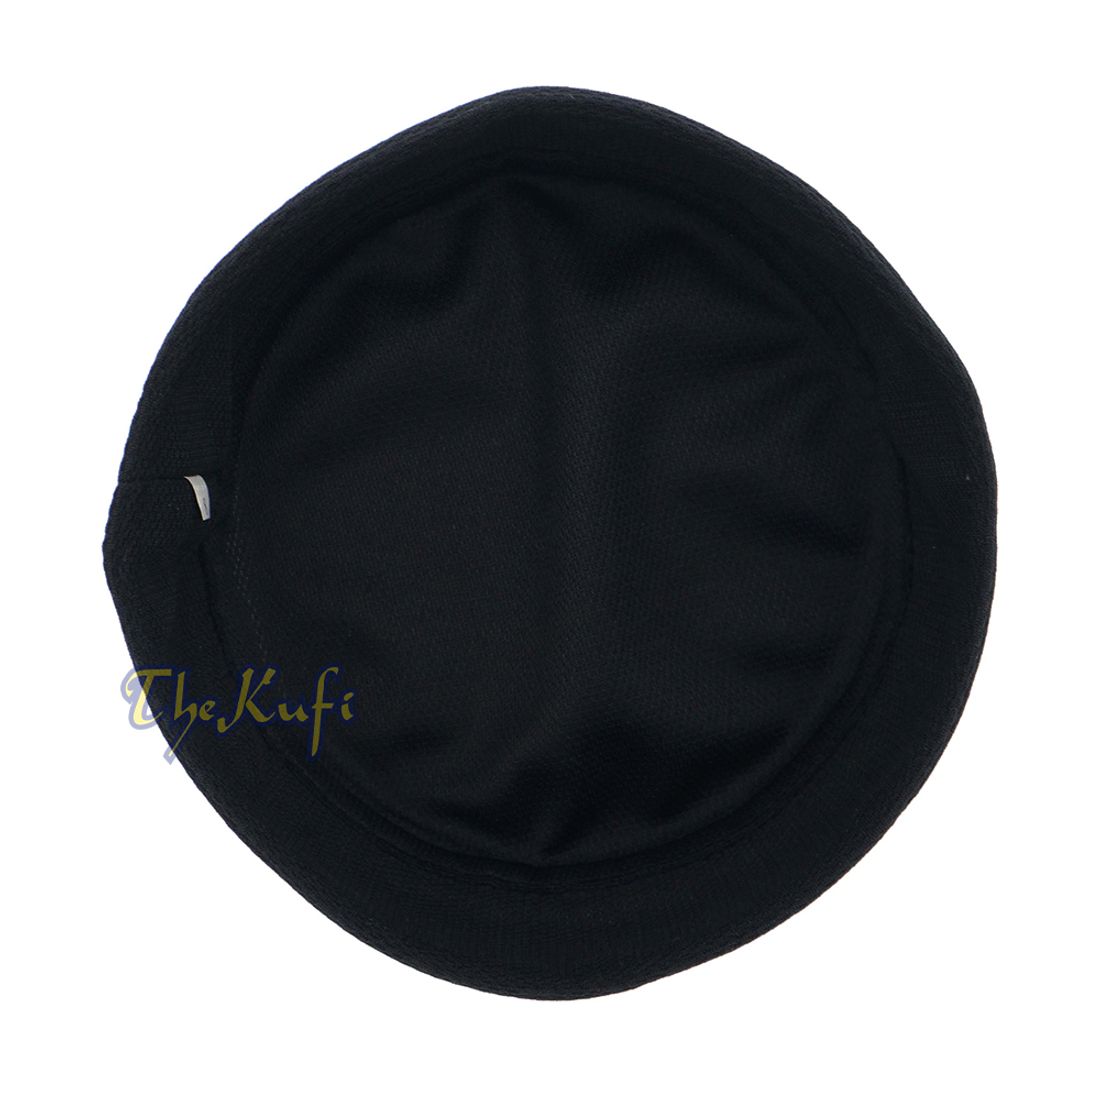 Black and Silver Madun Vented Top Pliable Two-color Round Kufi Hat